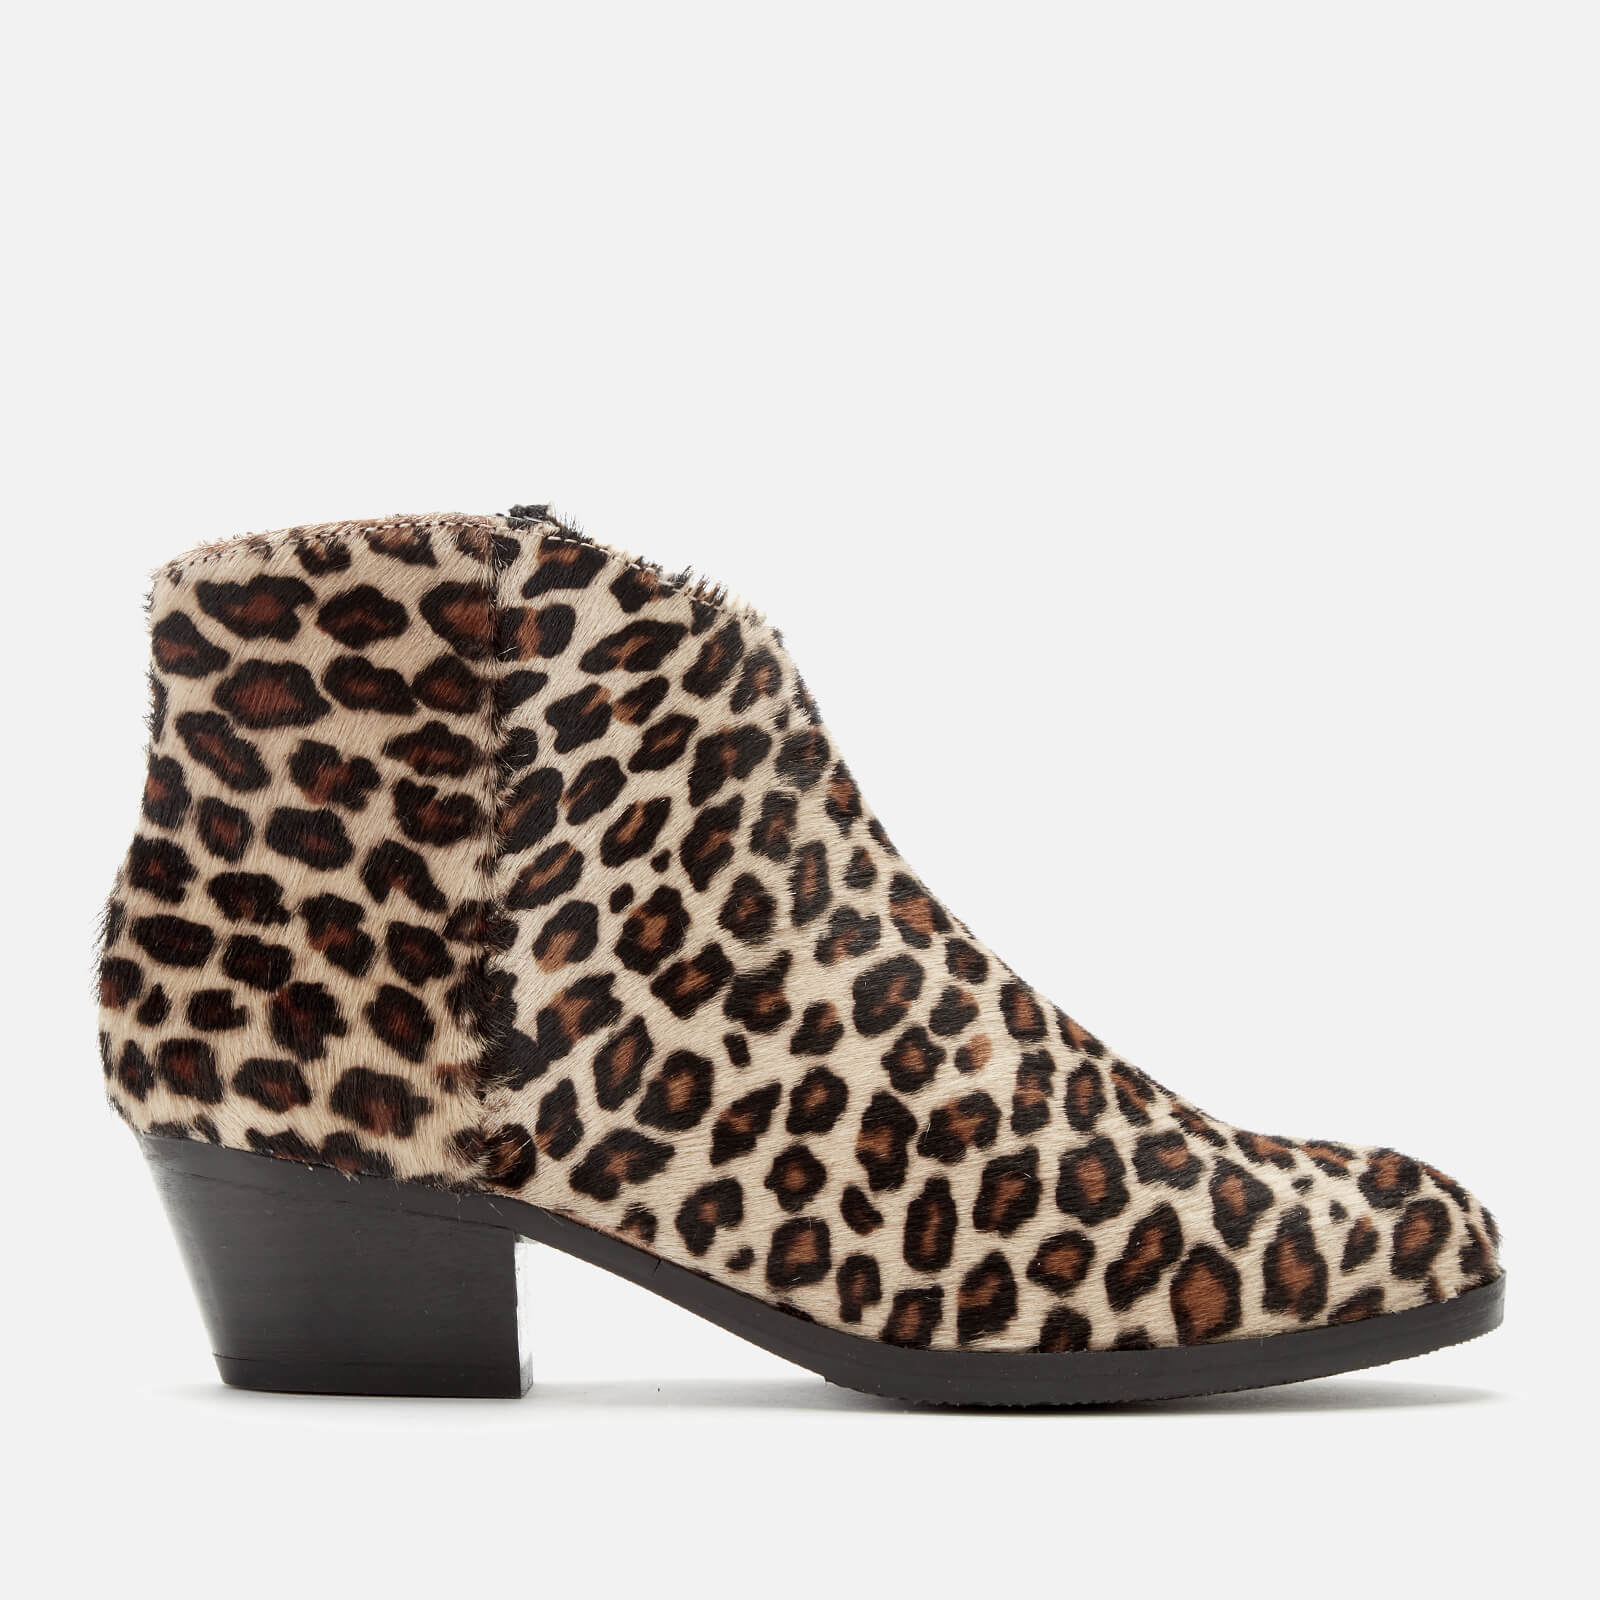 clarks ankle boots uk